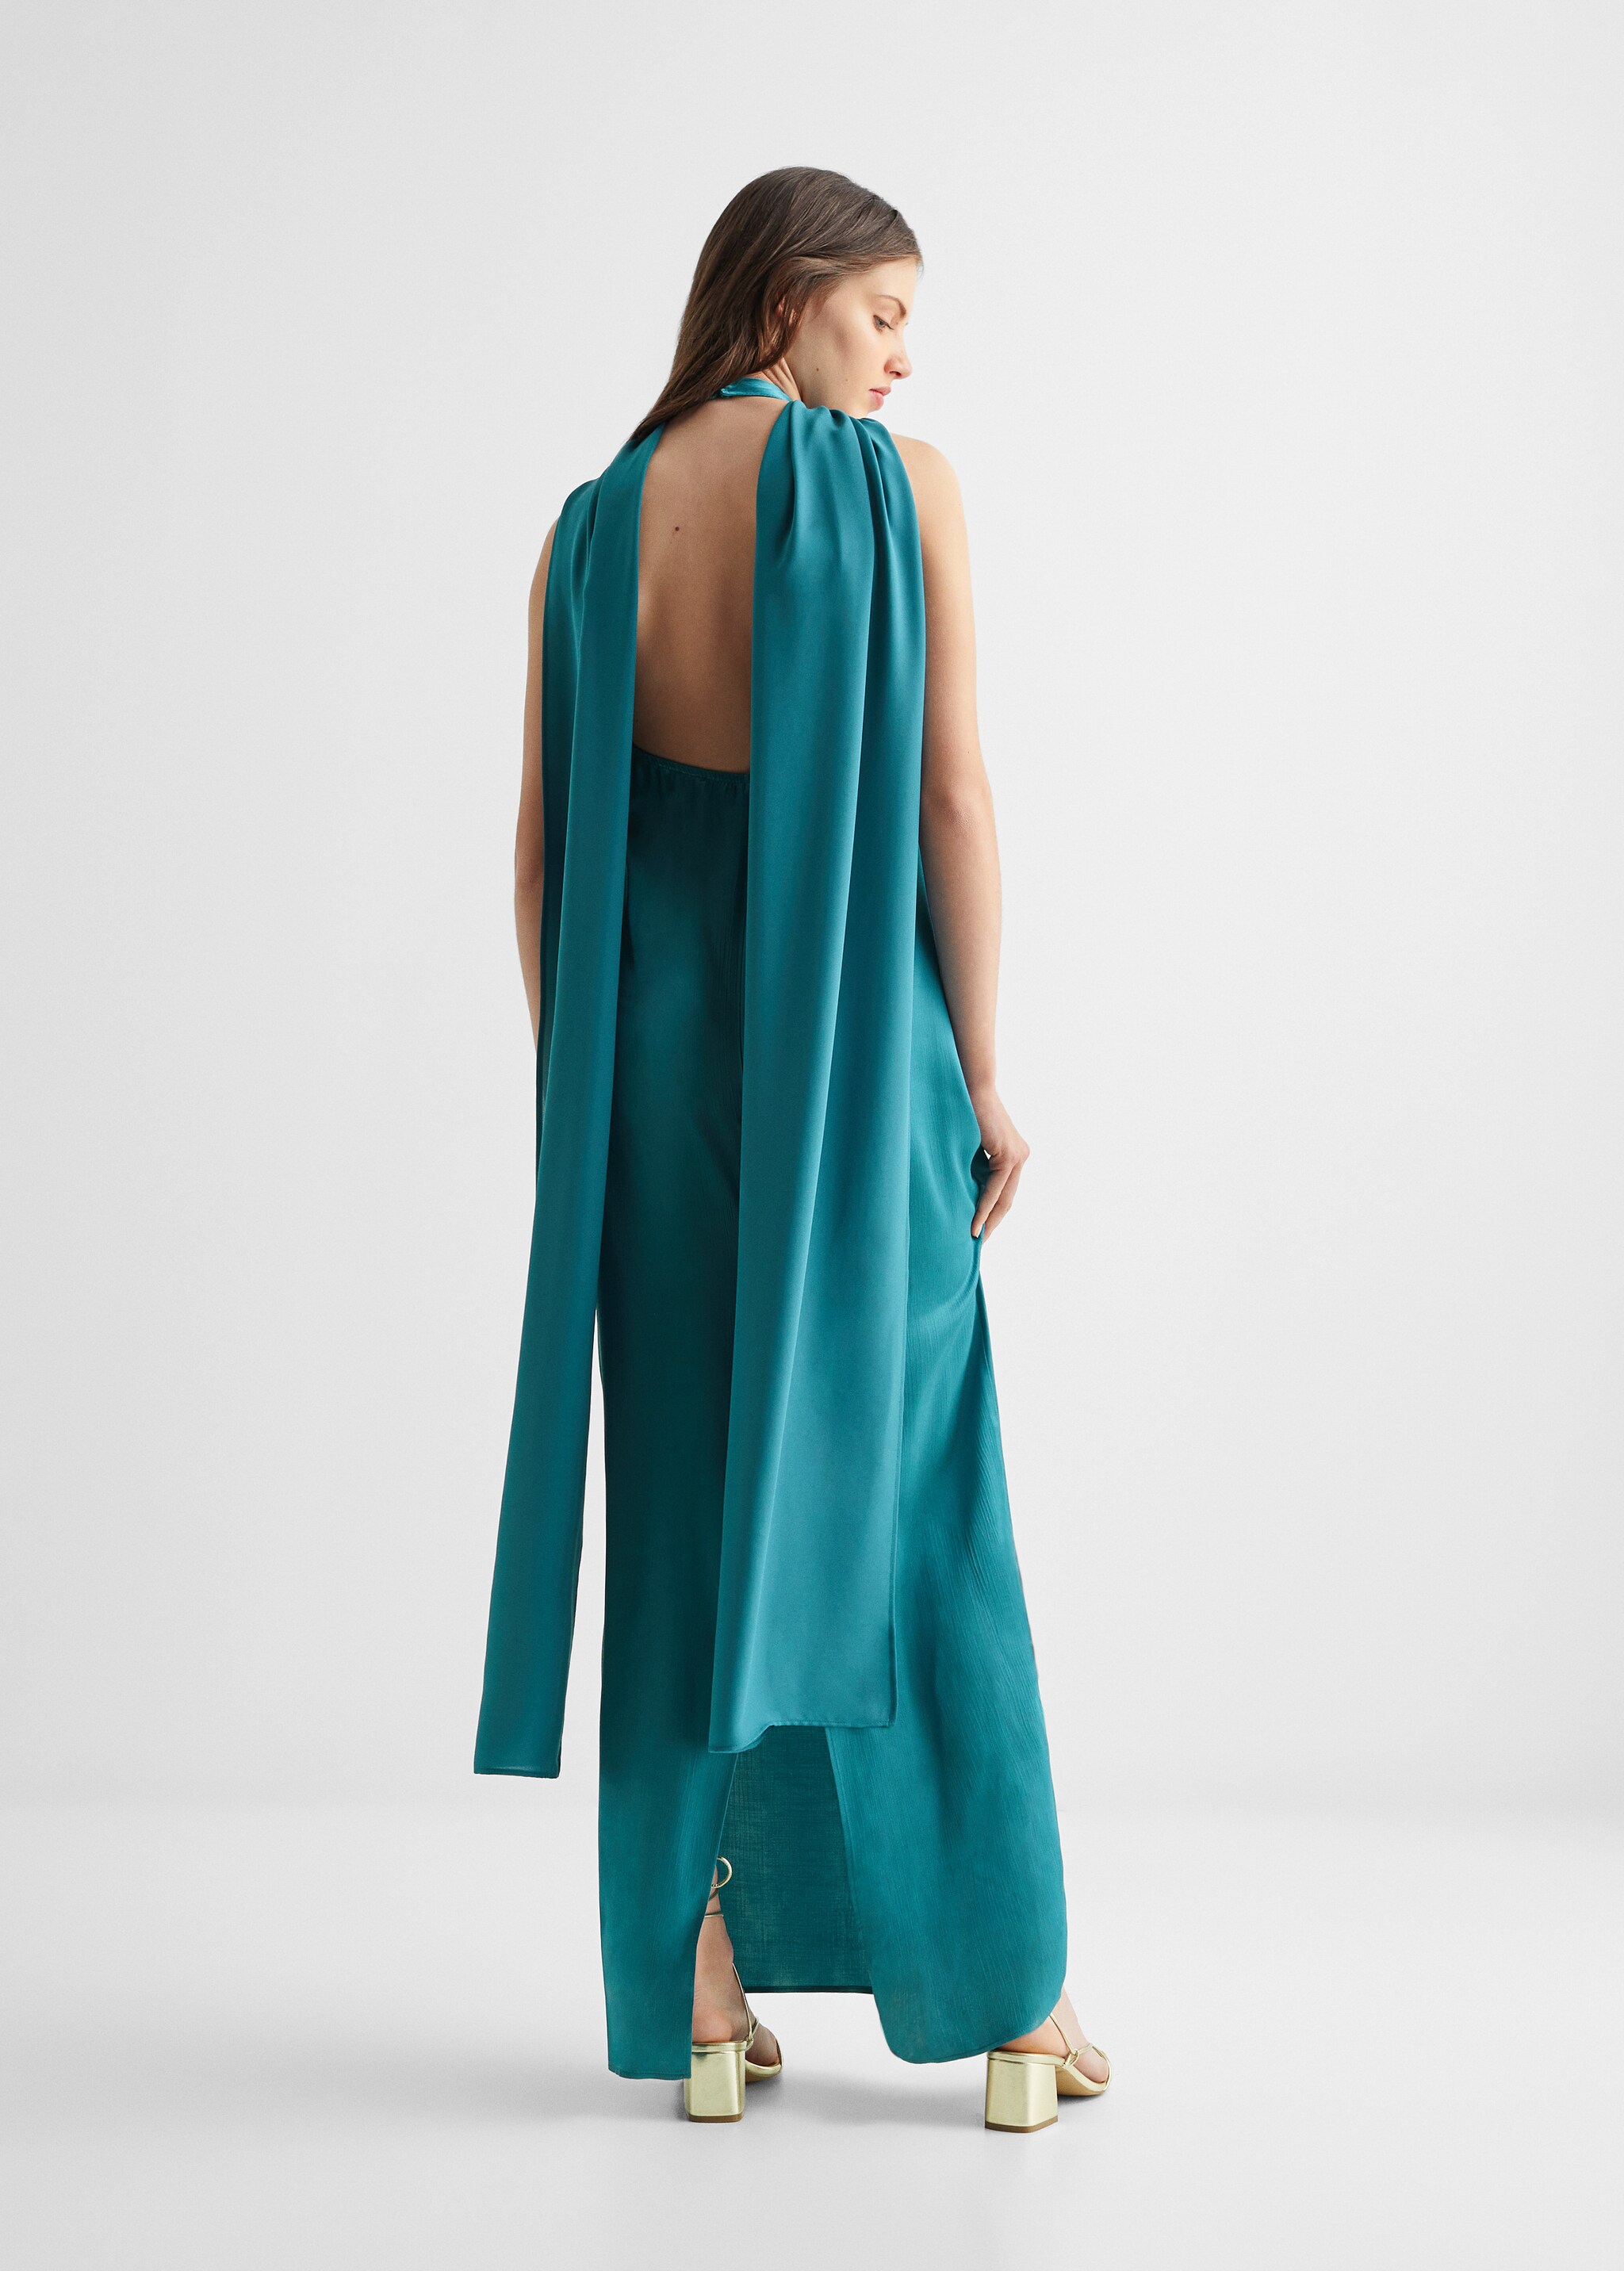 Asymmetrical dress - Reverse of the article